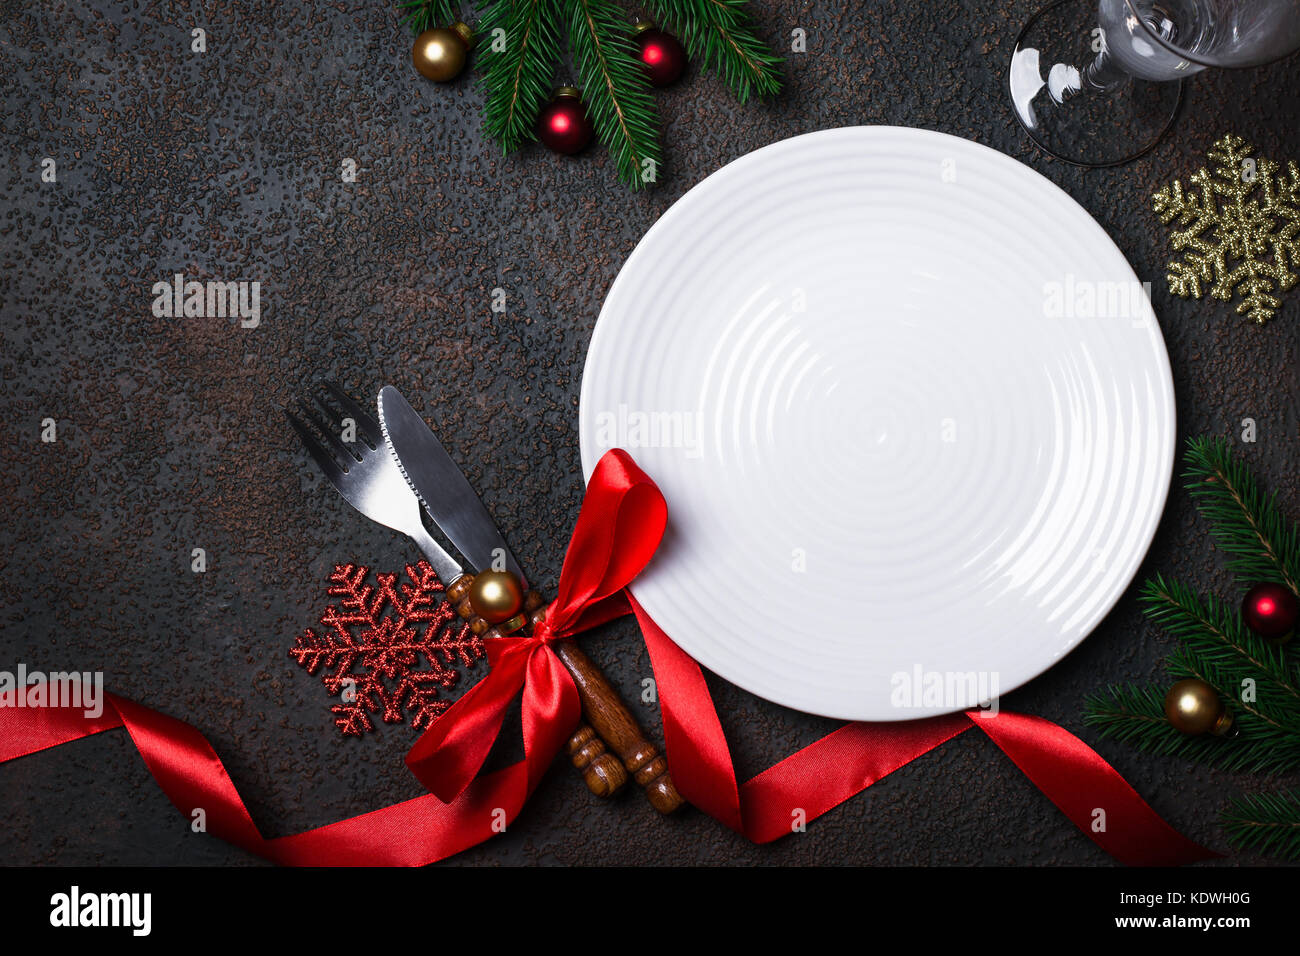 Christmas table setting with christmas decorations on a dark background Stock Photo